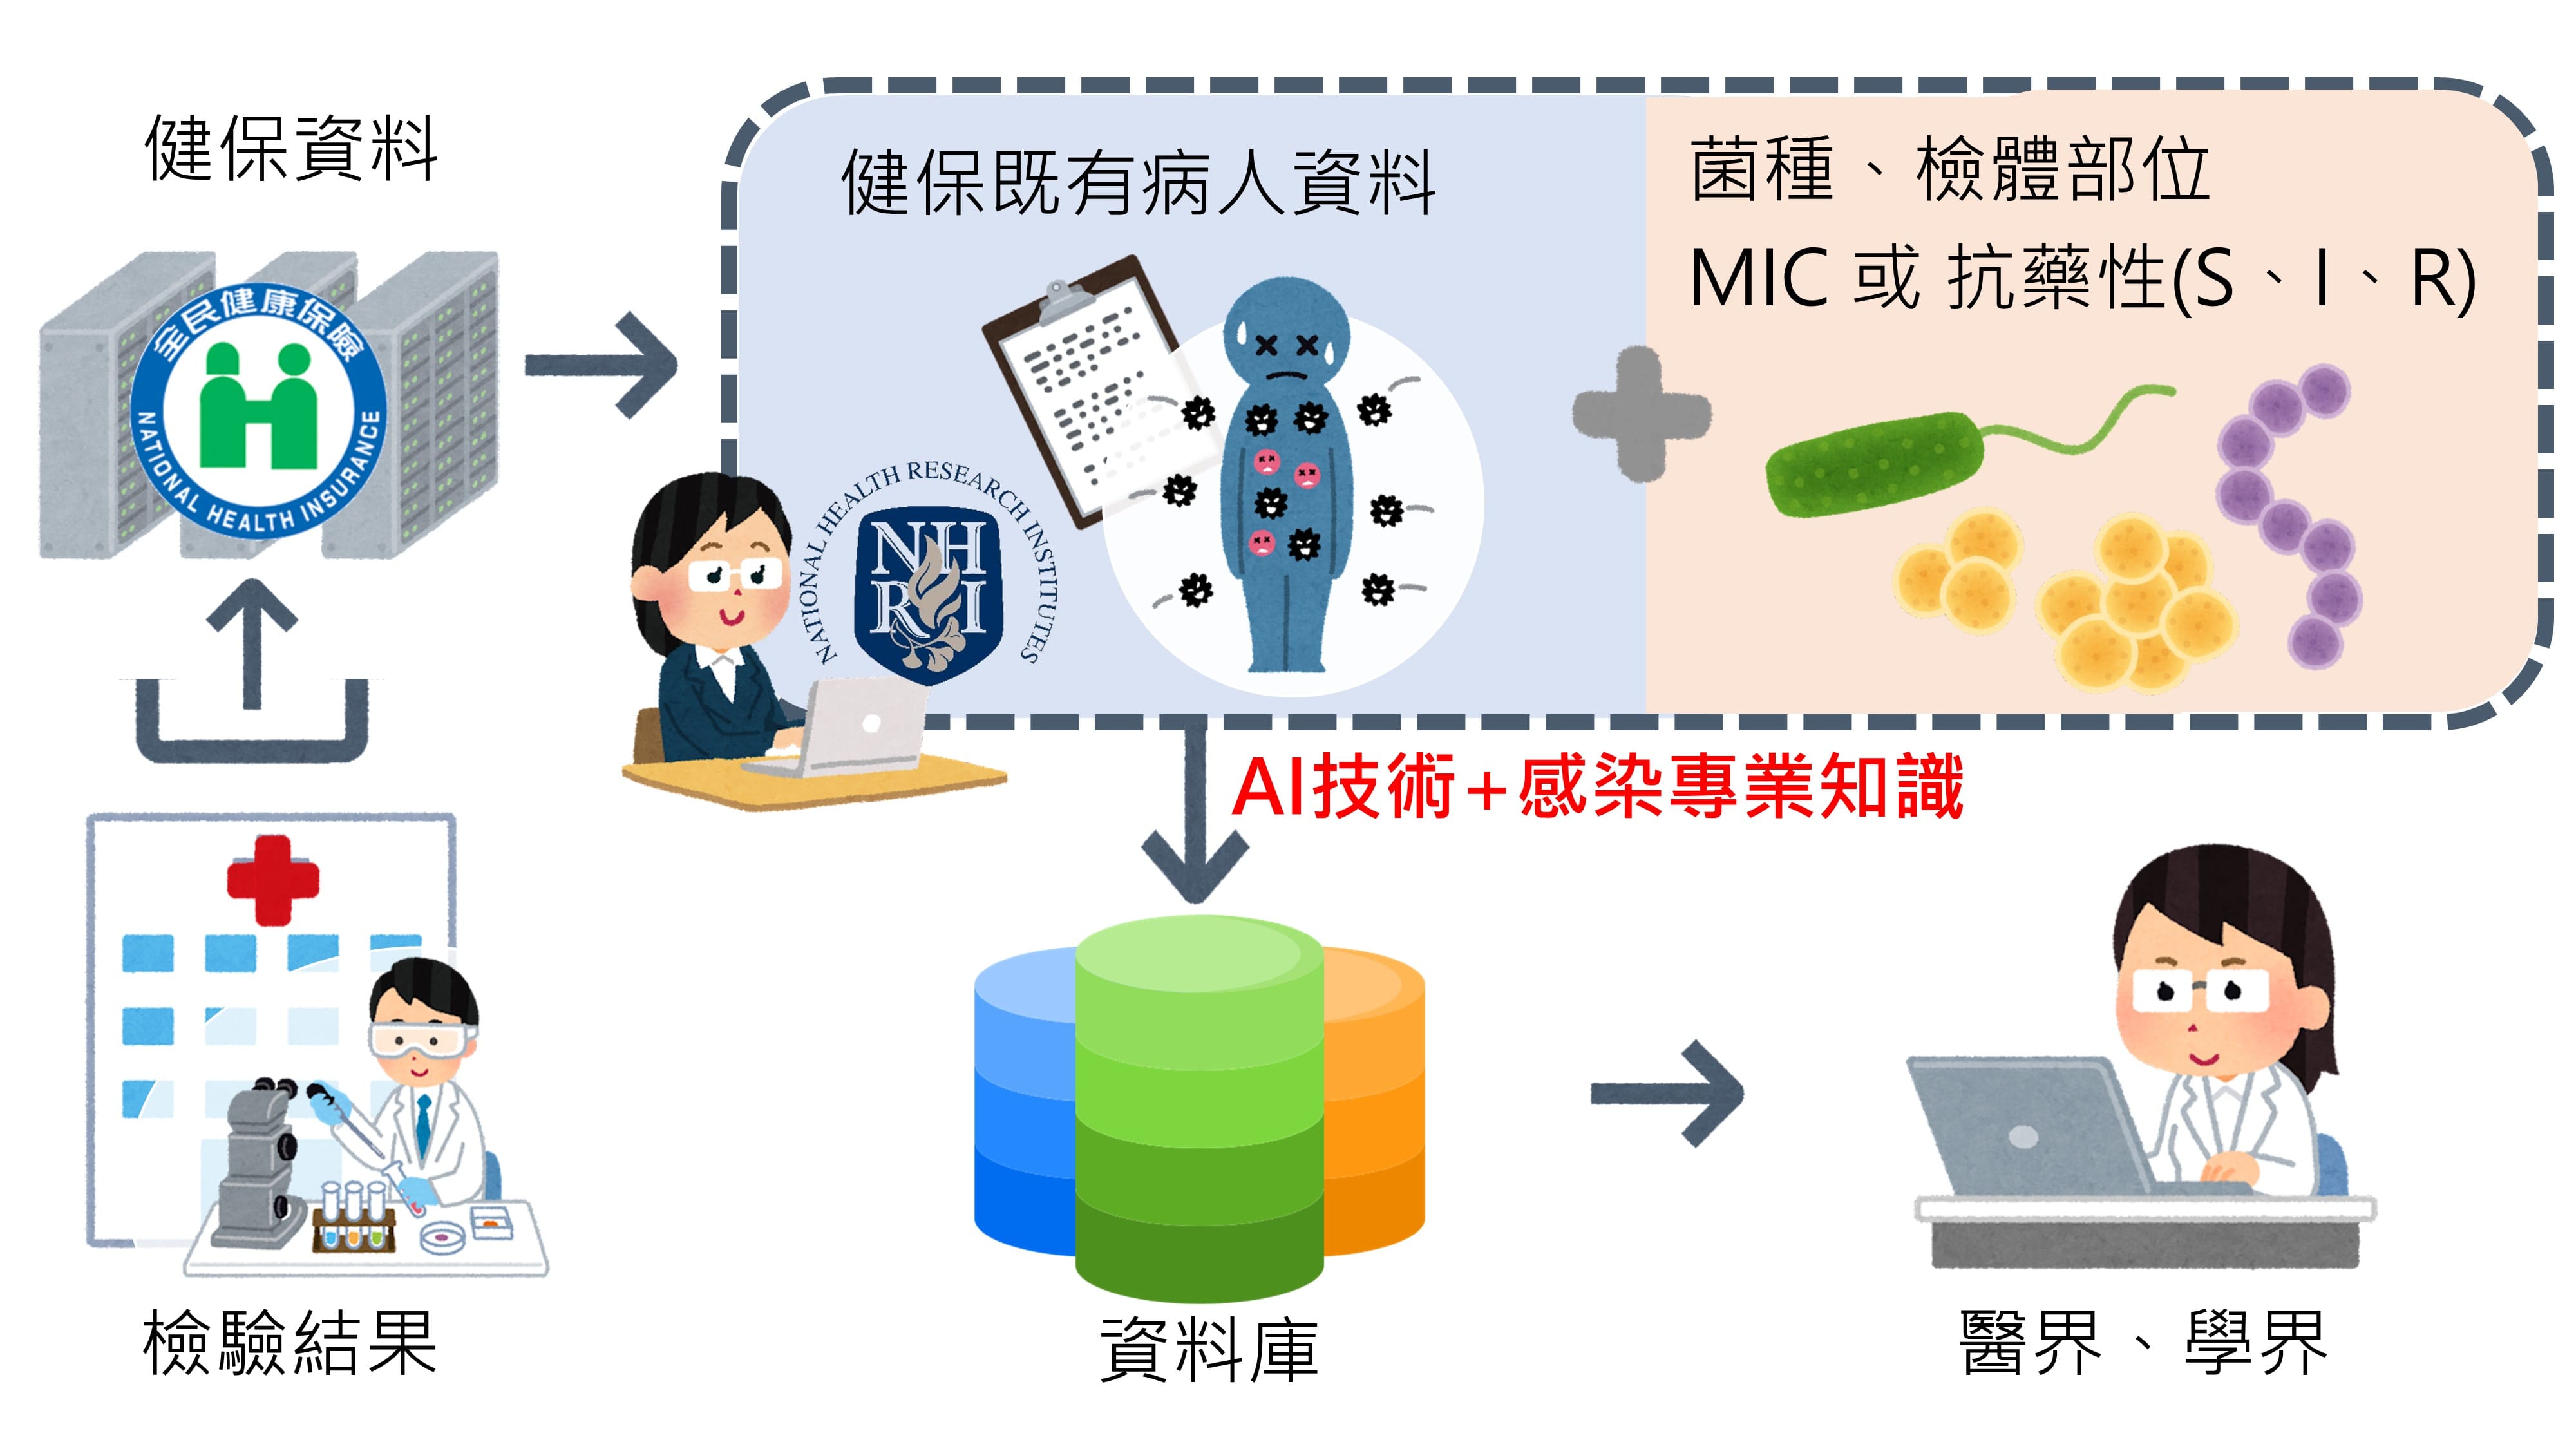 Application of natural language technology to build AI automation to manage infectious disease pathogen thematic database